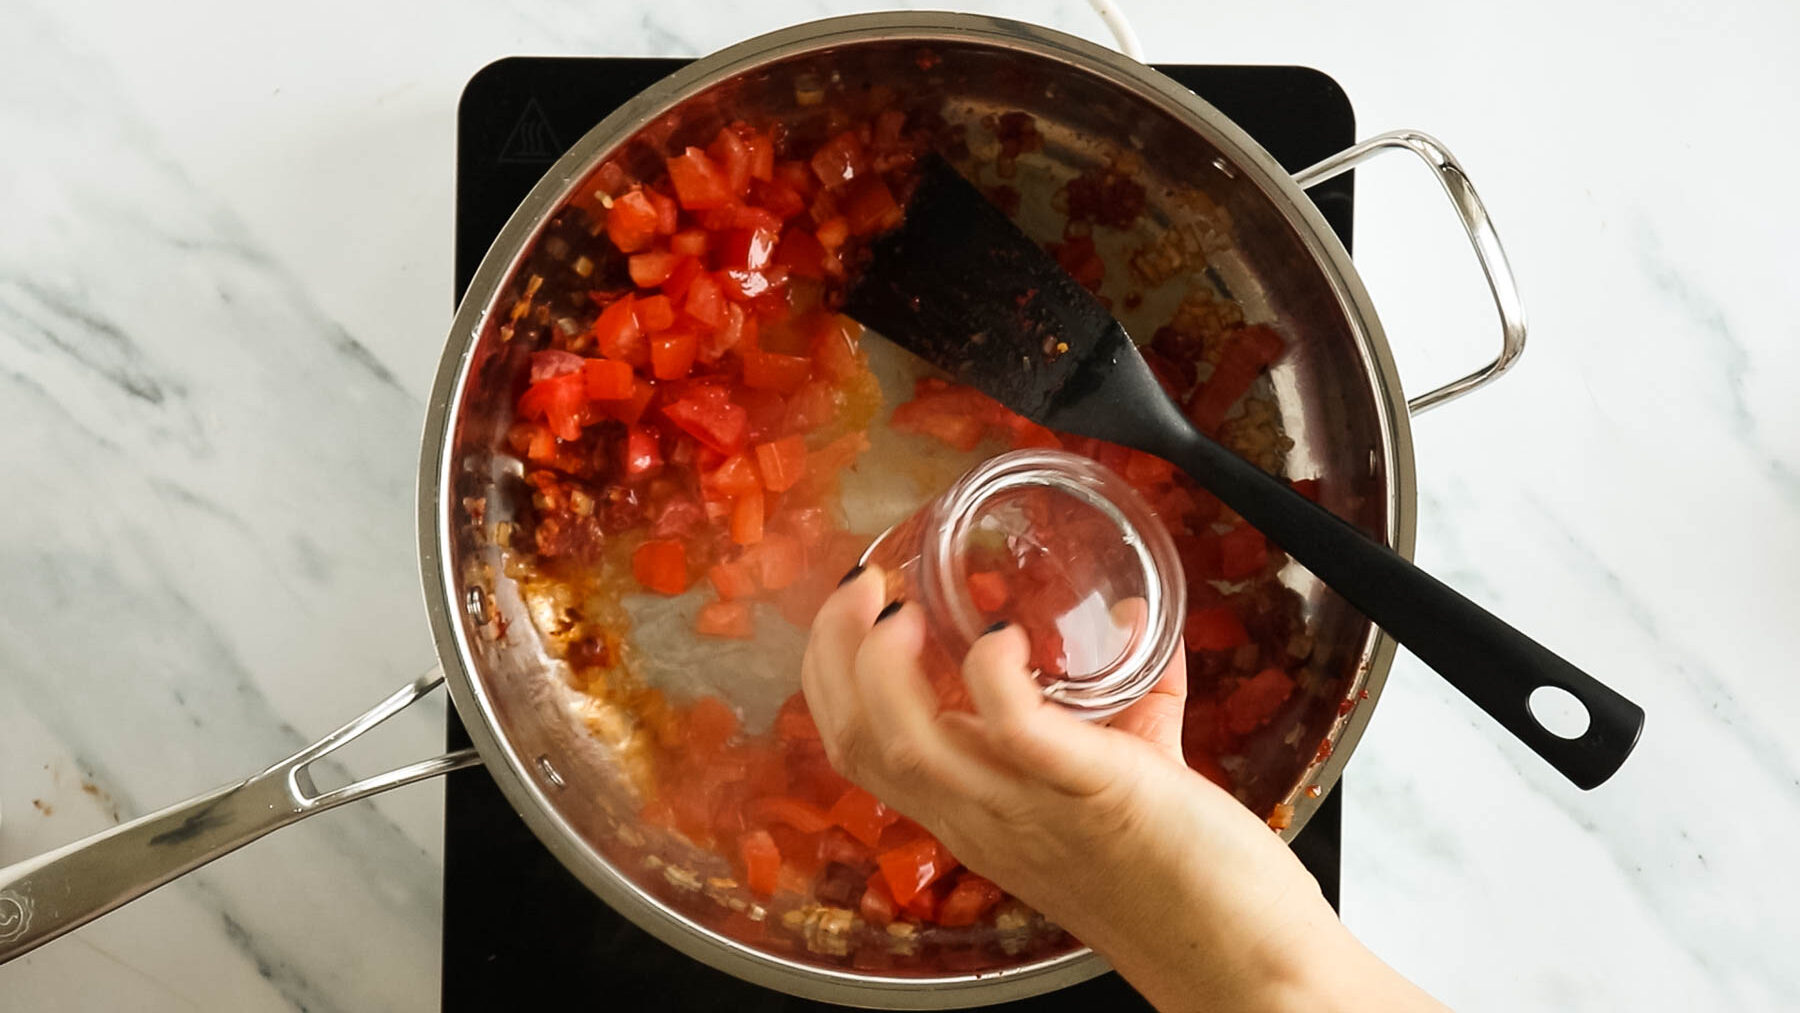 Adding vodka to tomatoes in a skillet.